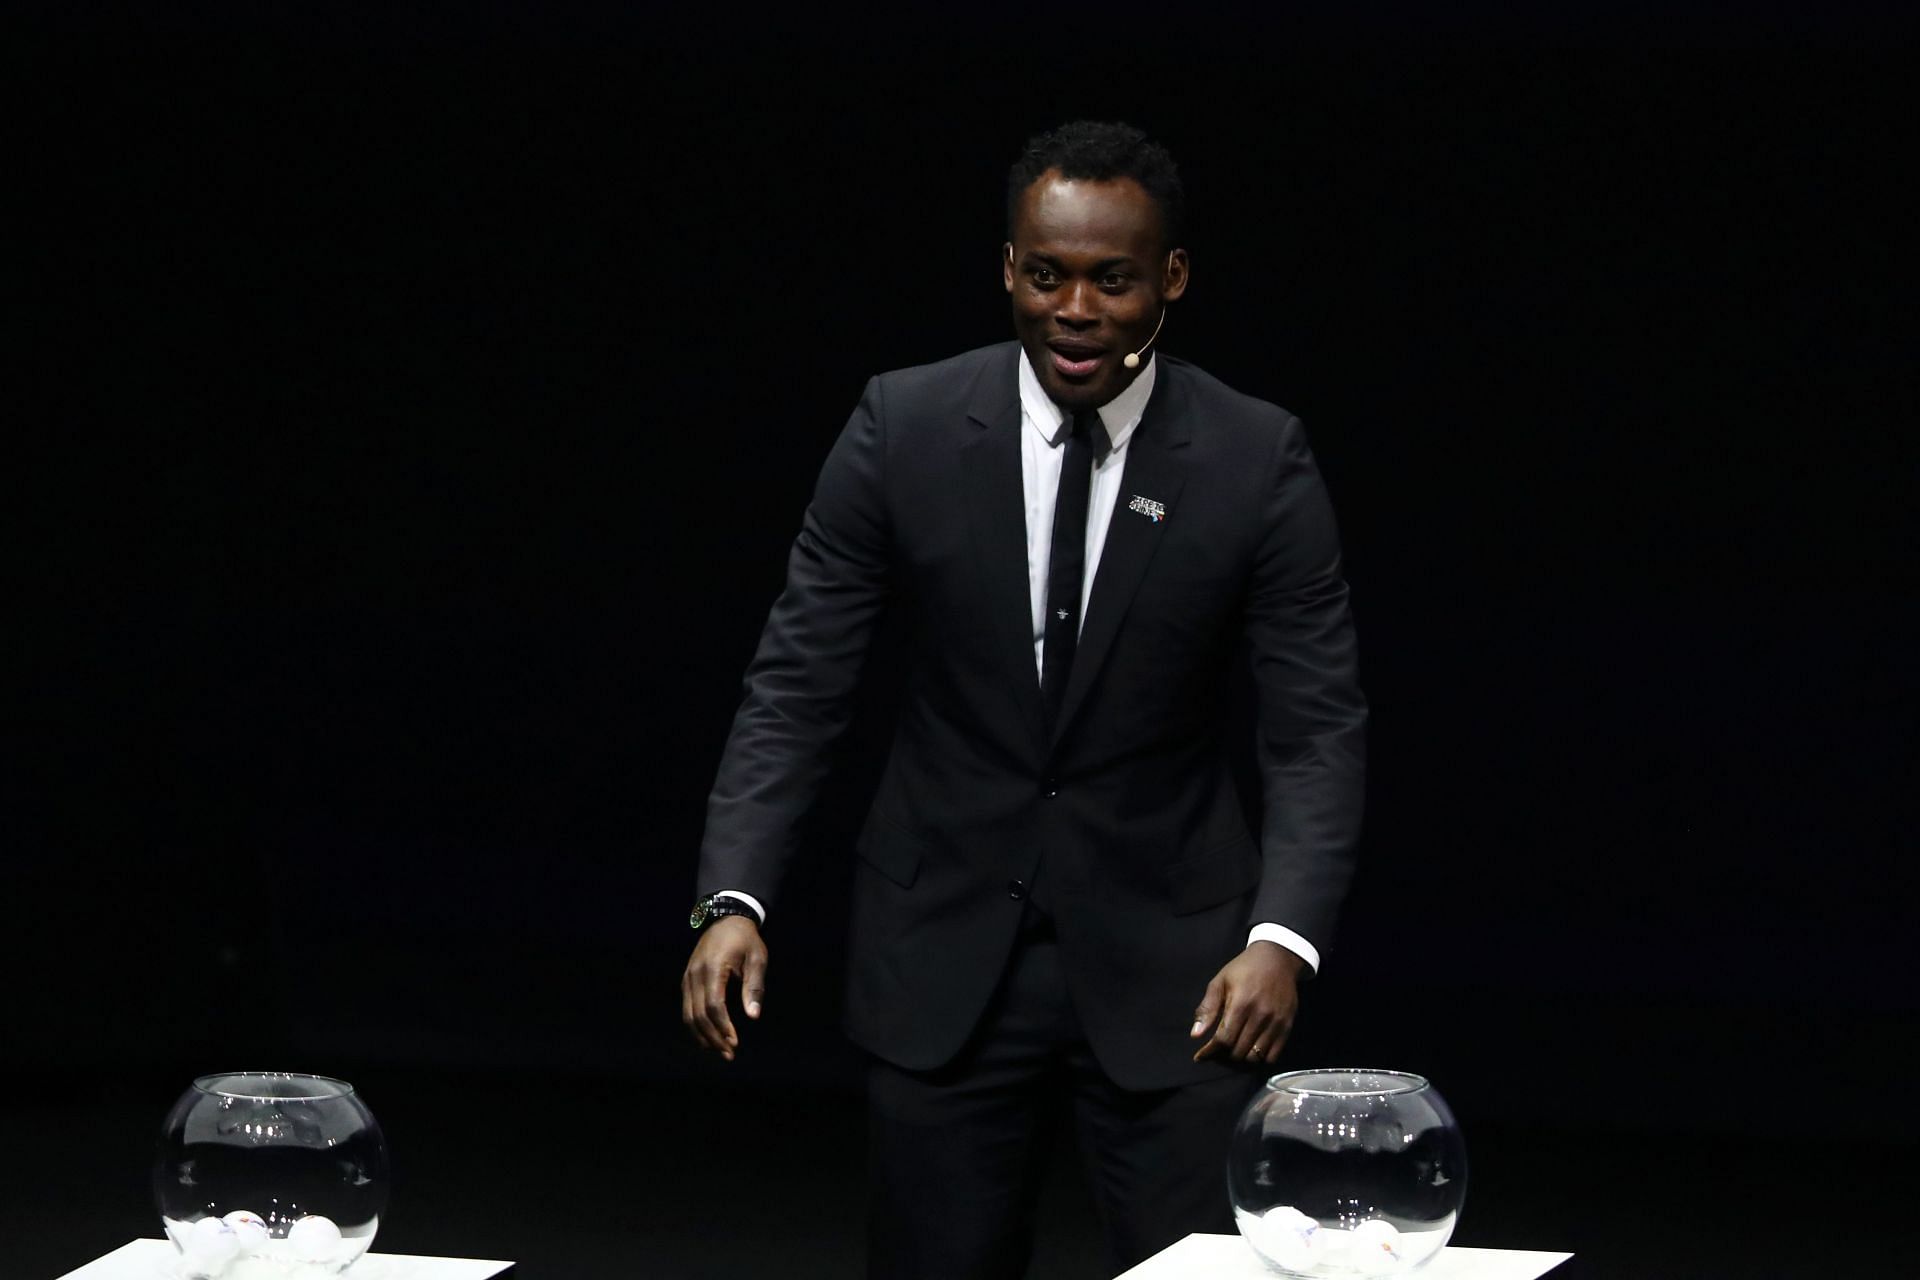 Michael Essien is now an assistant coach in Denmark.